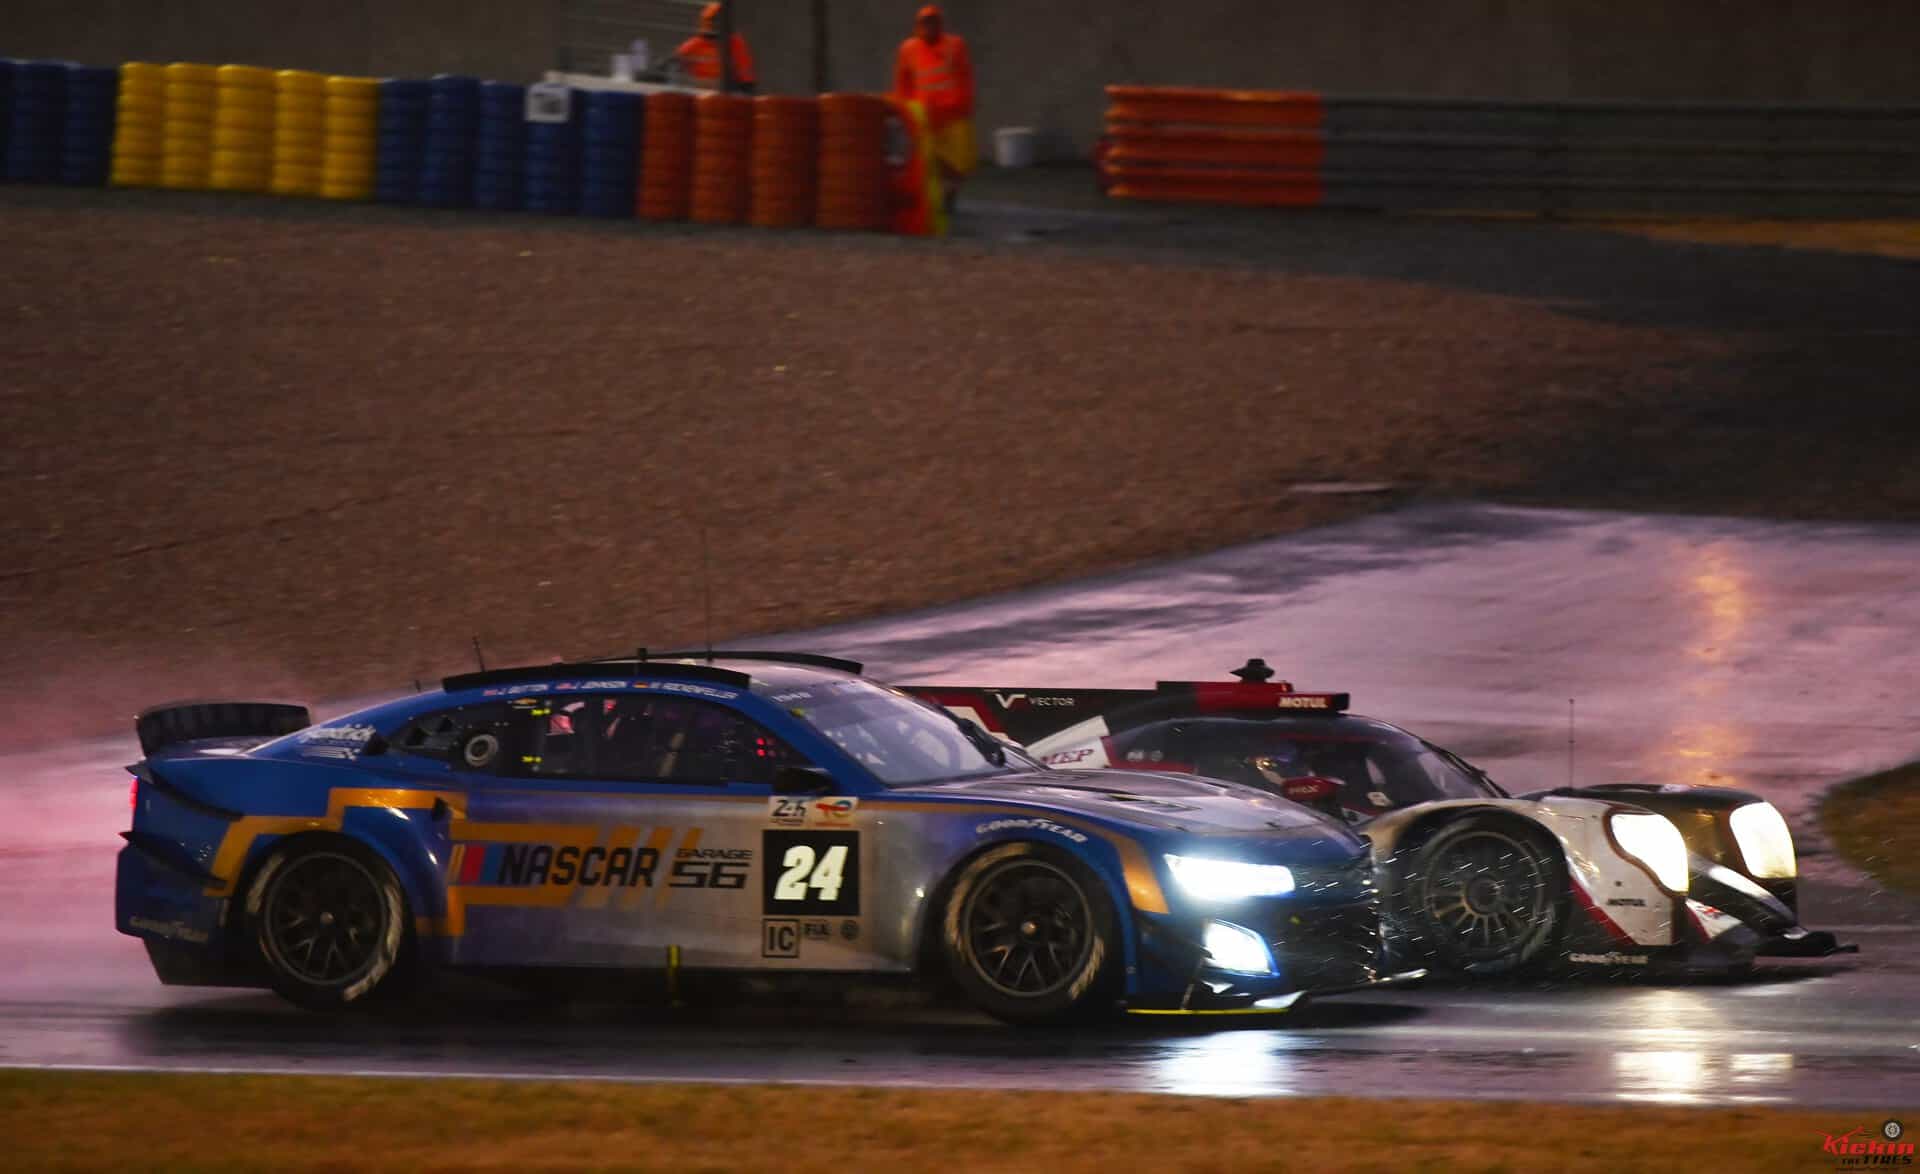 The NASCAR Garage 56 Camaro battles with a Prototype at night in the rain during the 24 Hours of Le Mans.